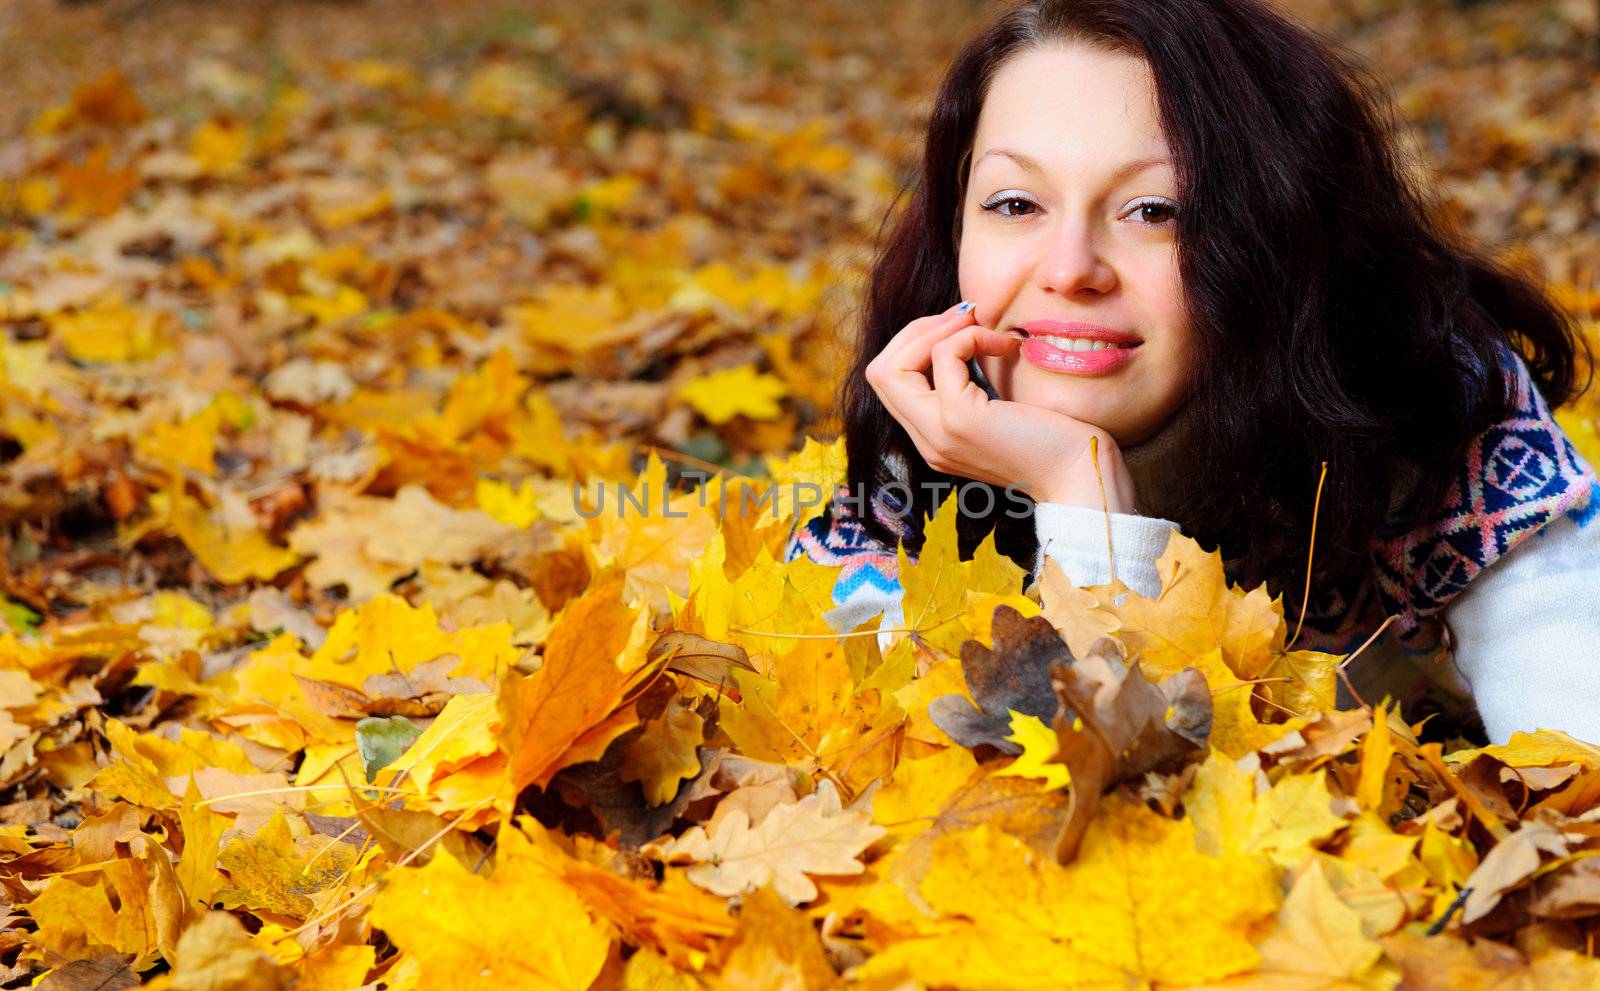 The attractive woman in autumn forest by galdzer